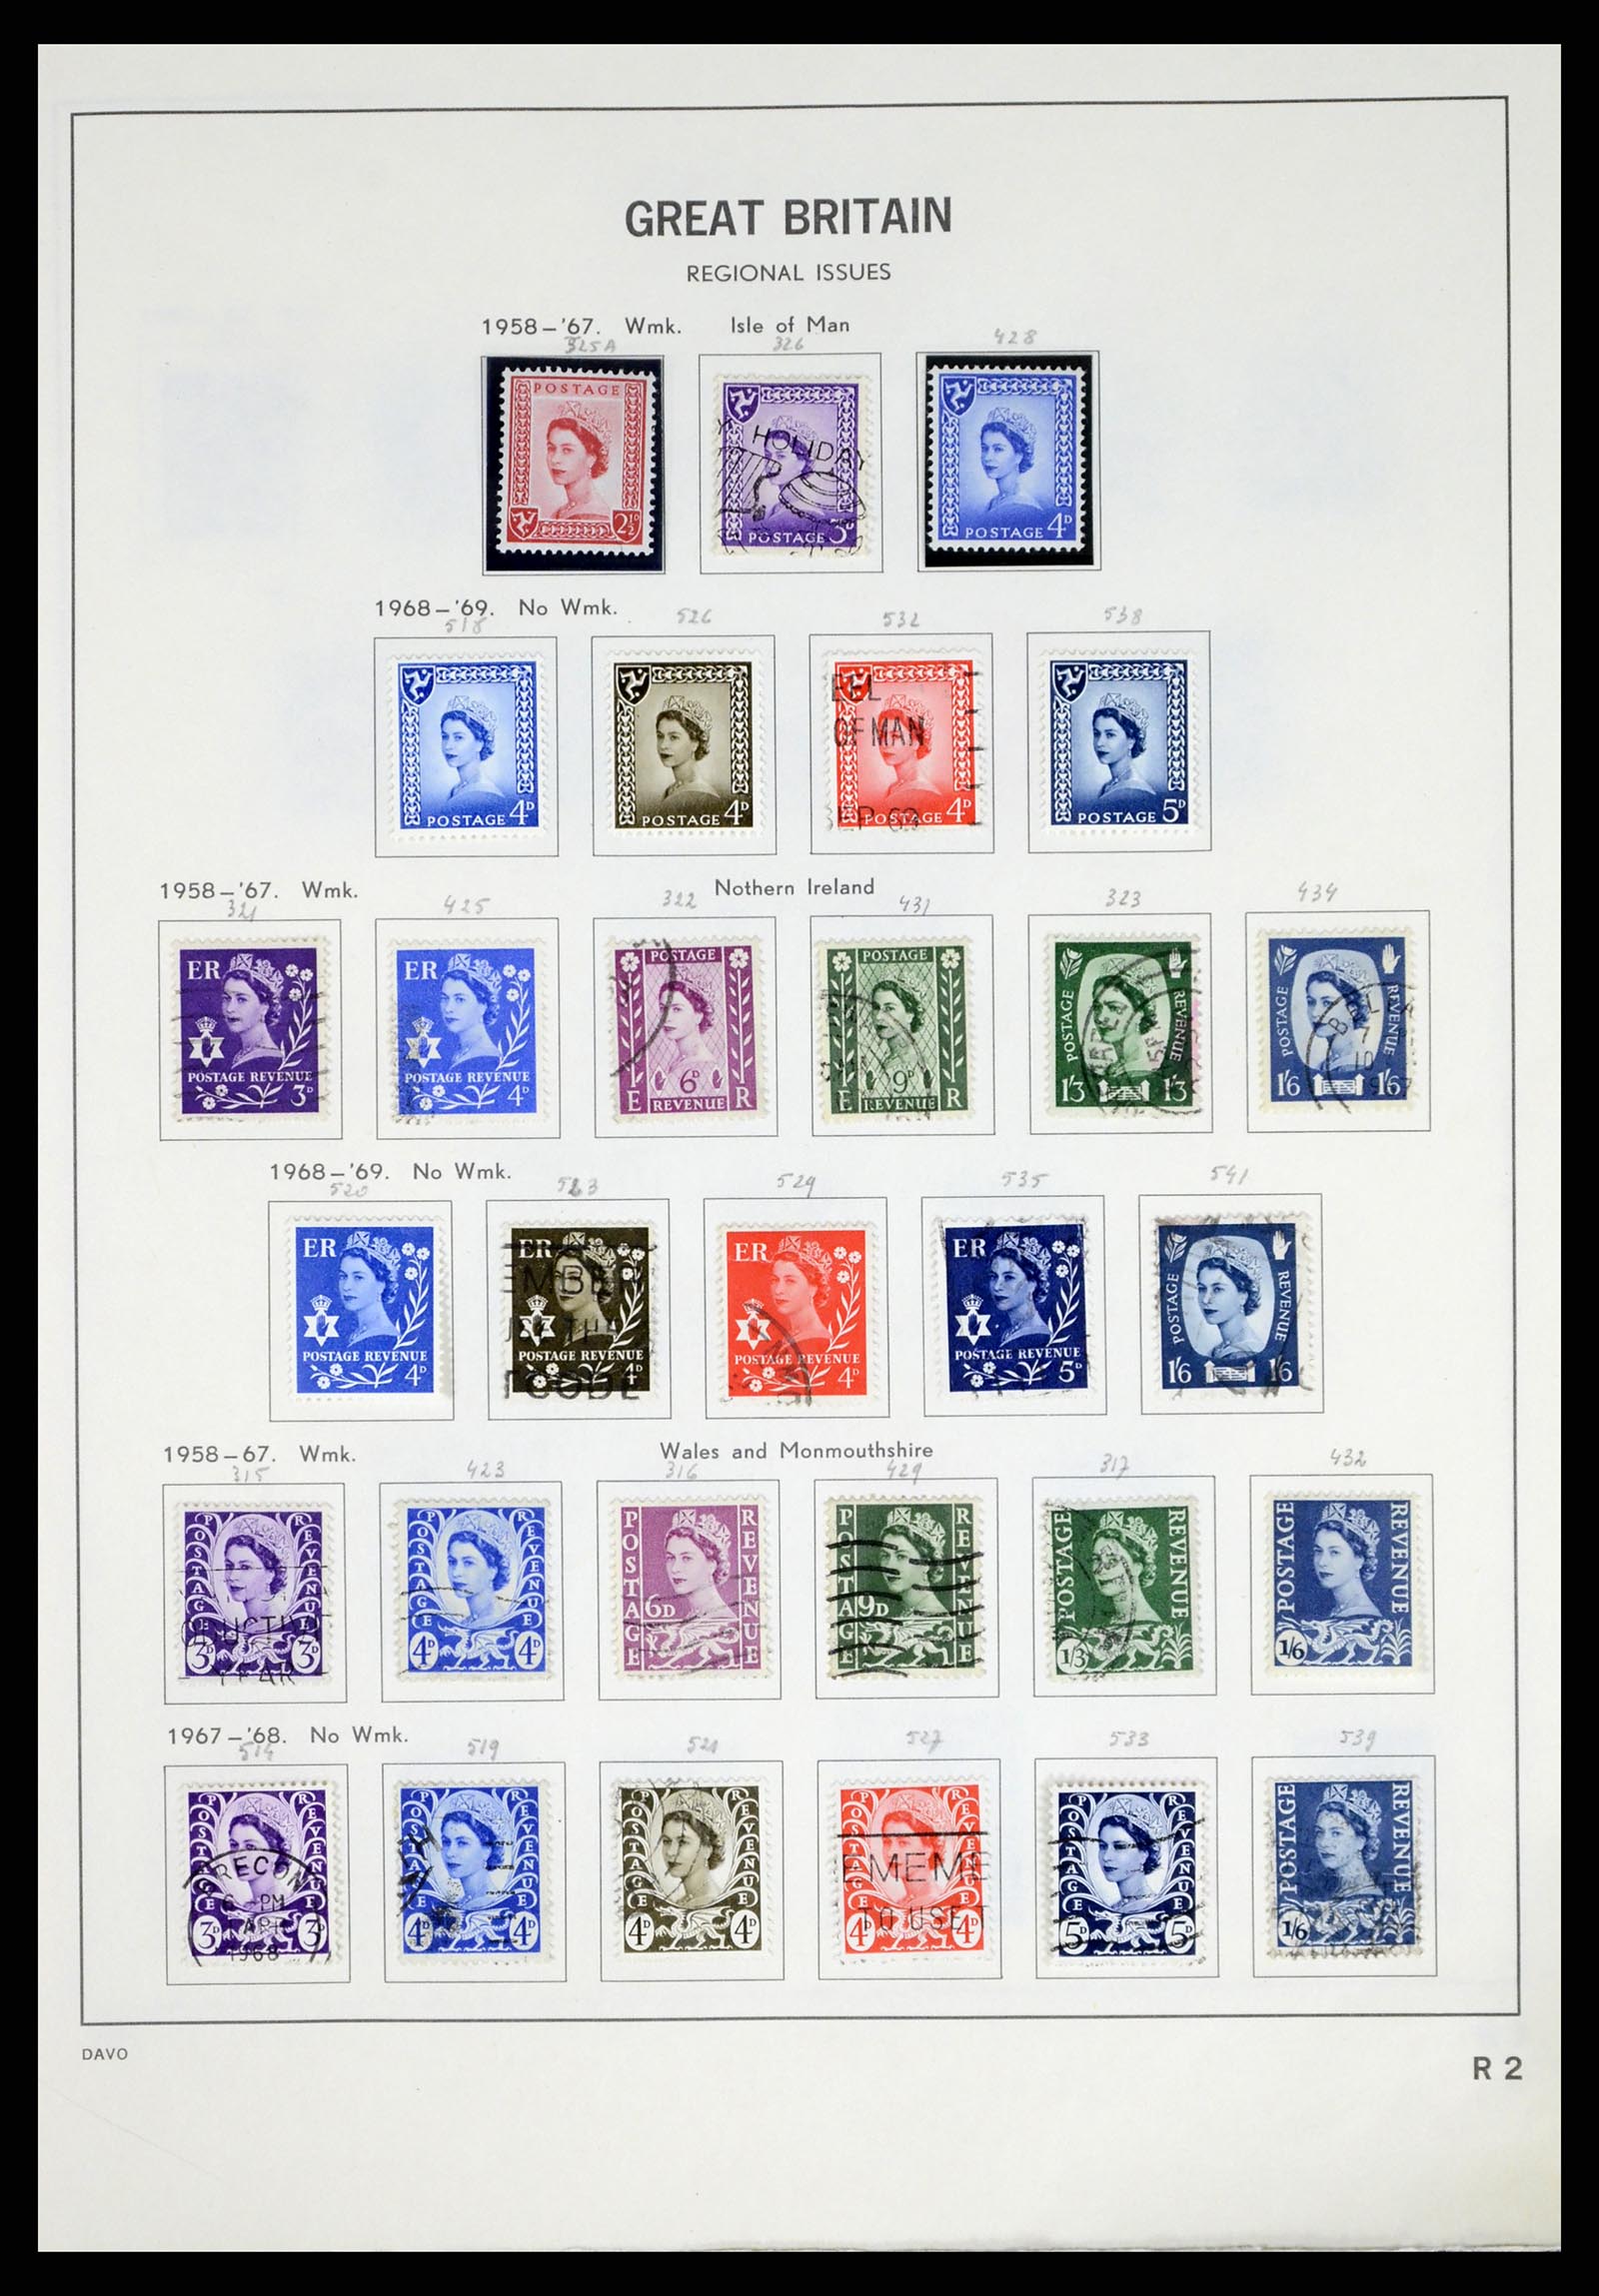 37375 122 - Stamp collection 37375 Great Britain 1840-1982.